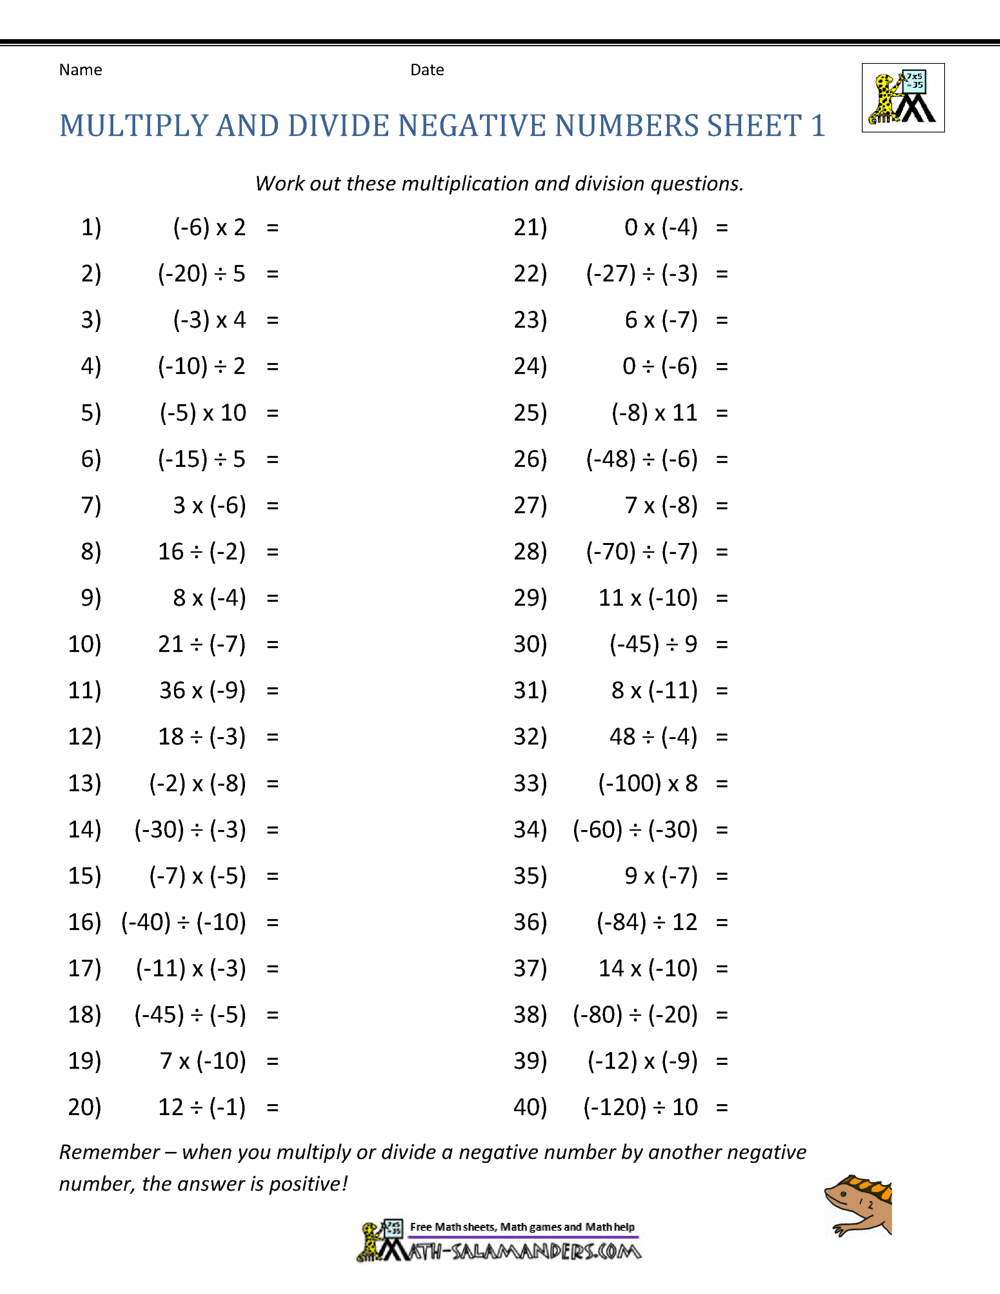 Multiply and Divide Negative Numbers Throughout Multiplying Negative Numbers Worksheet